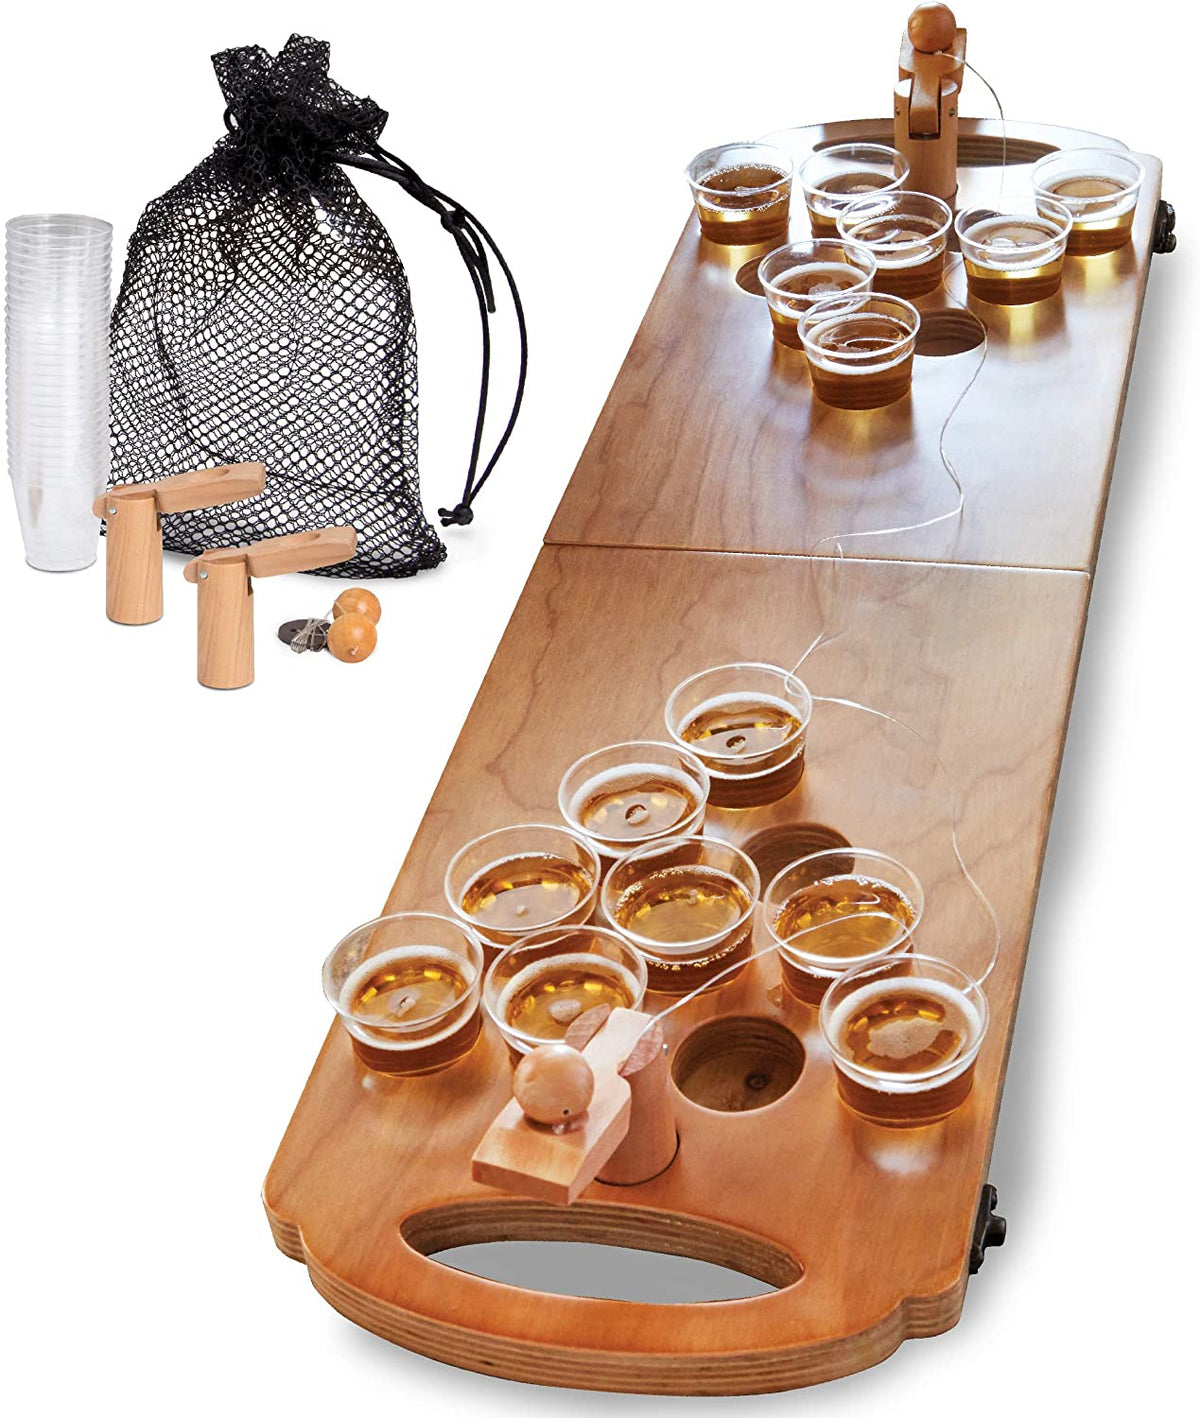 Mini Beer Pong Tabletop Set with Table, Cups, Balls &amp; Carrying Case